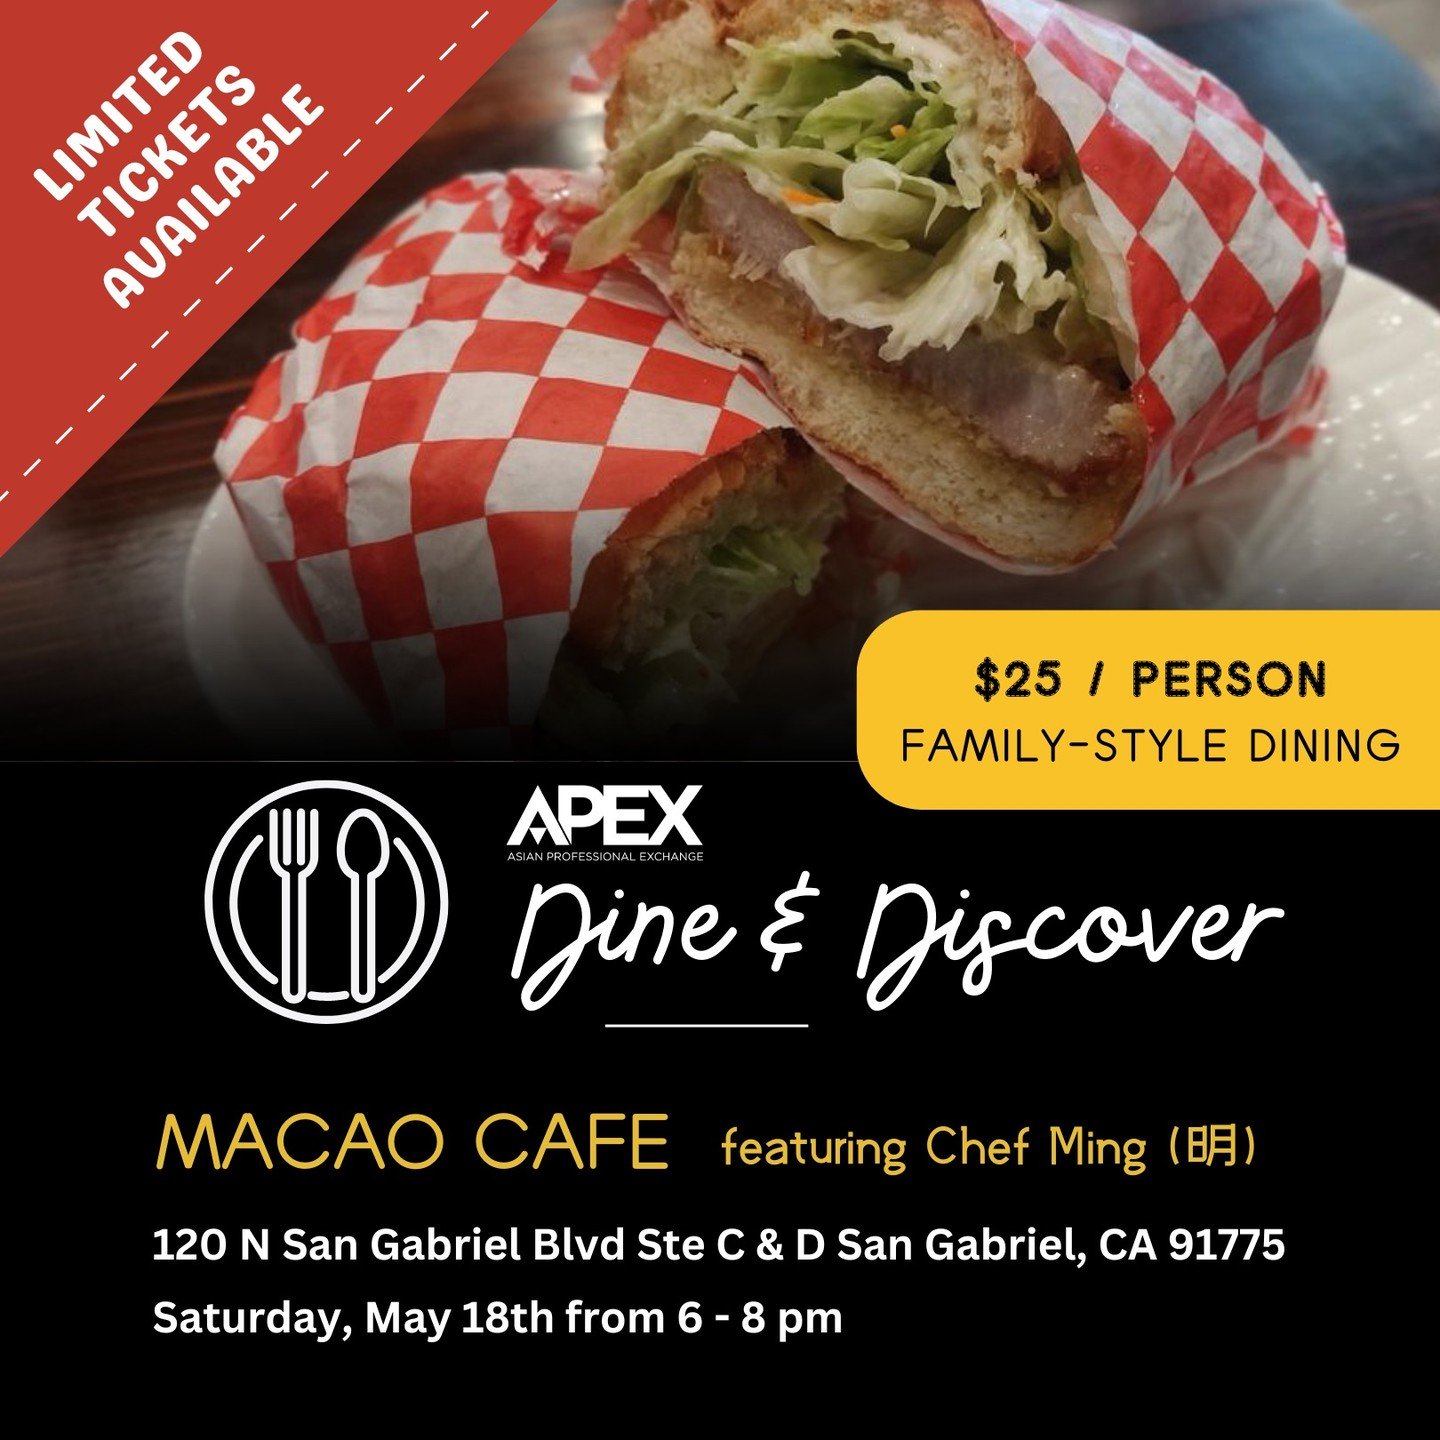 Get ready for an epic culinary journey at Macao Cafe, the latest addition to the APEX Dine and Discover series!

🍽️ Join us on May 18, 2024, at 6:00 PM at Macao Cafe in San Gabriel, CA, for an unforgettable family-style dining experience. 

🤤 The m